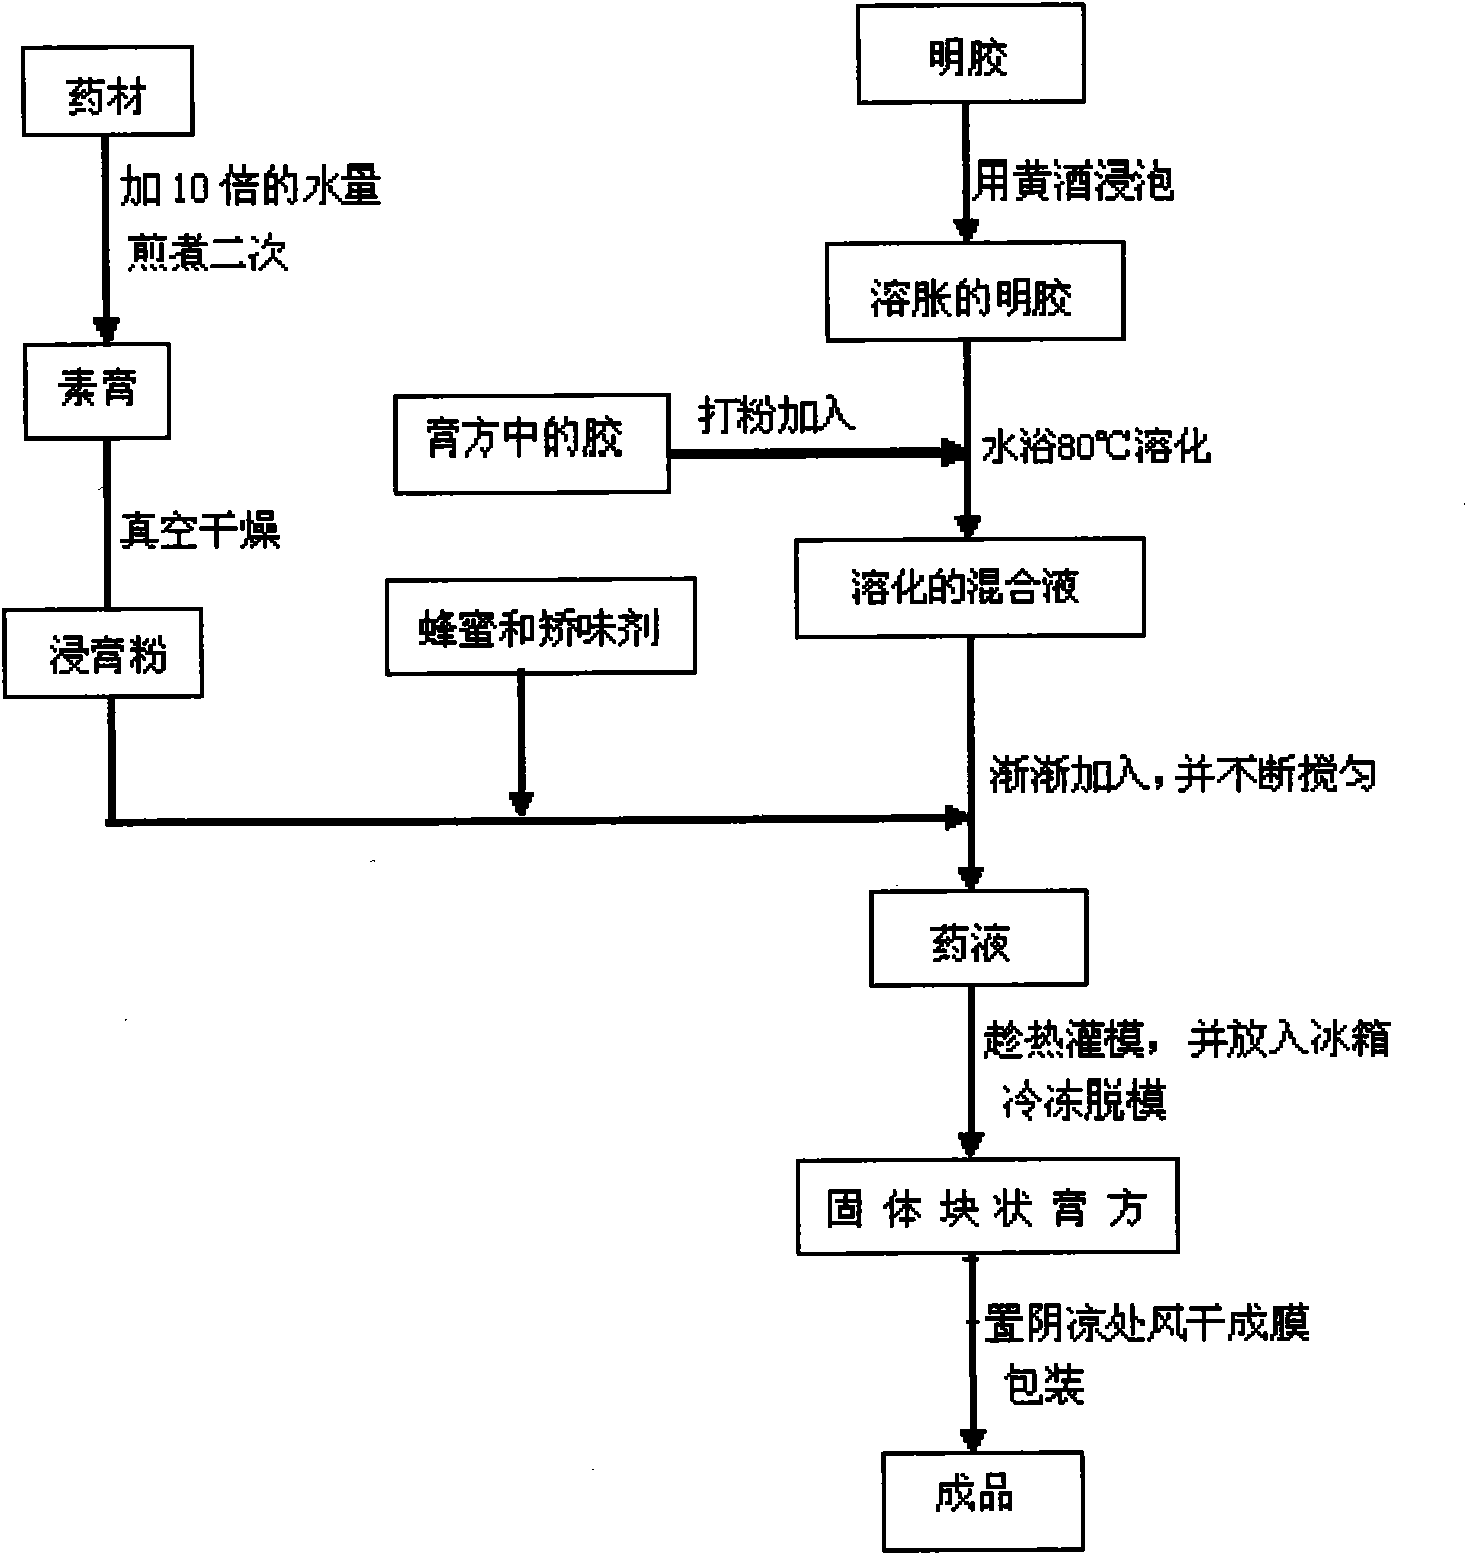 Method for solidifying traditional Chinese ointment